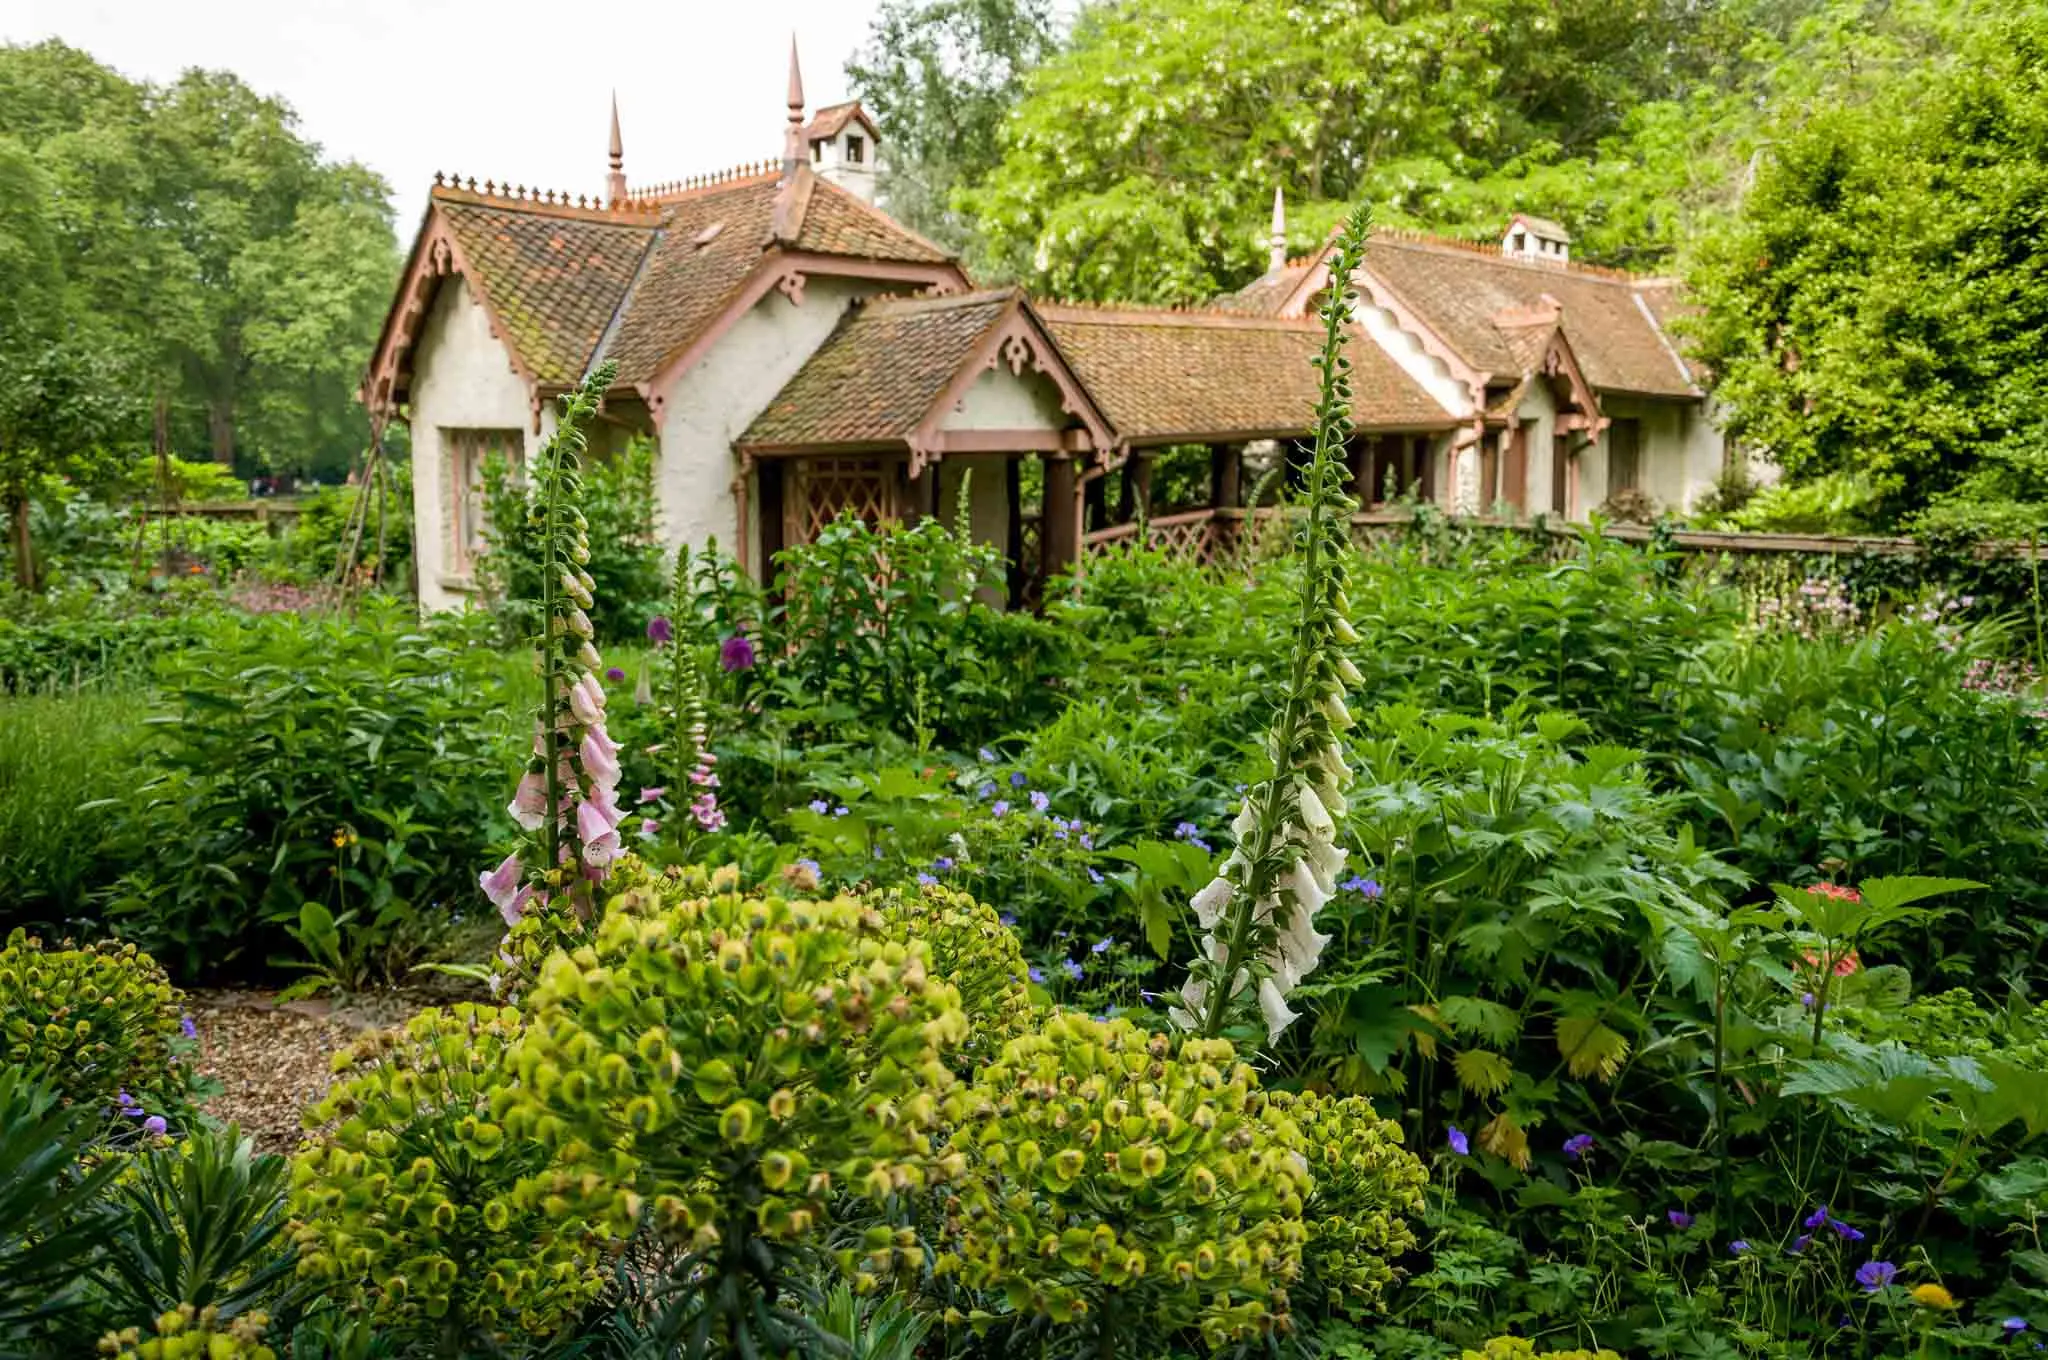 Cottage surrounded by plants and flowers